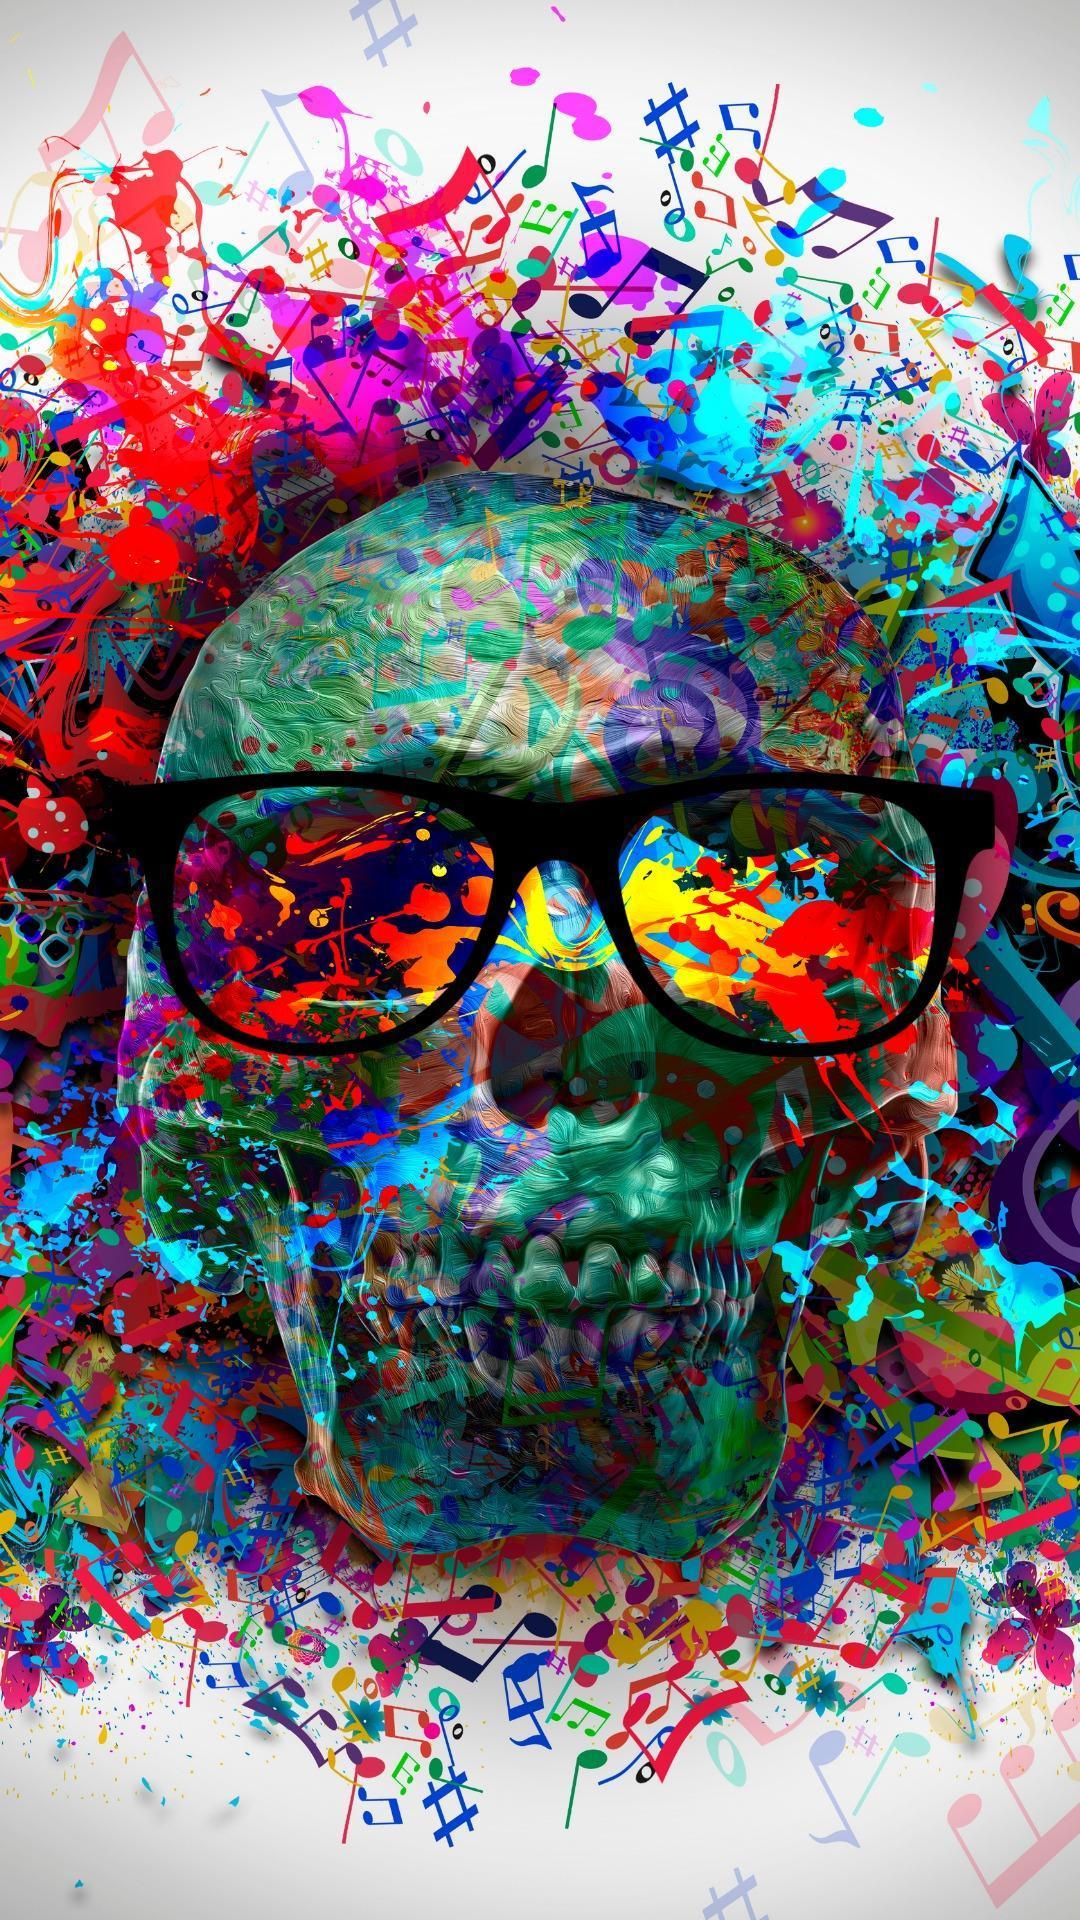 1080 x 1920 · jpeg - Dope Wallpapers for Android - APK Download